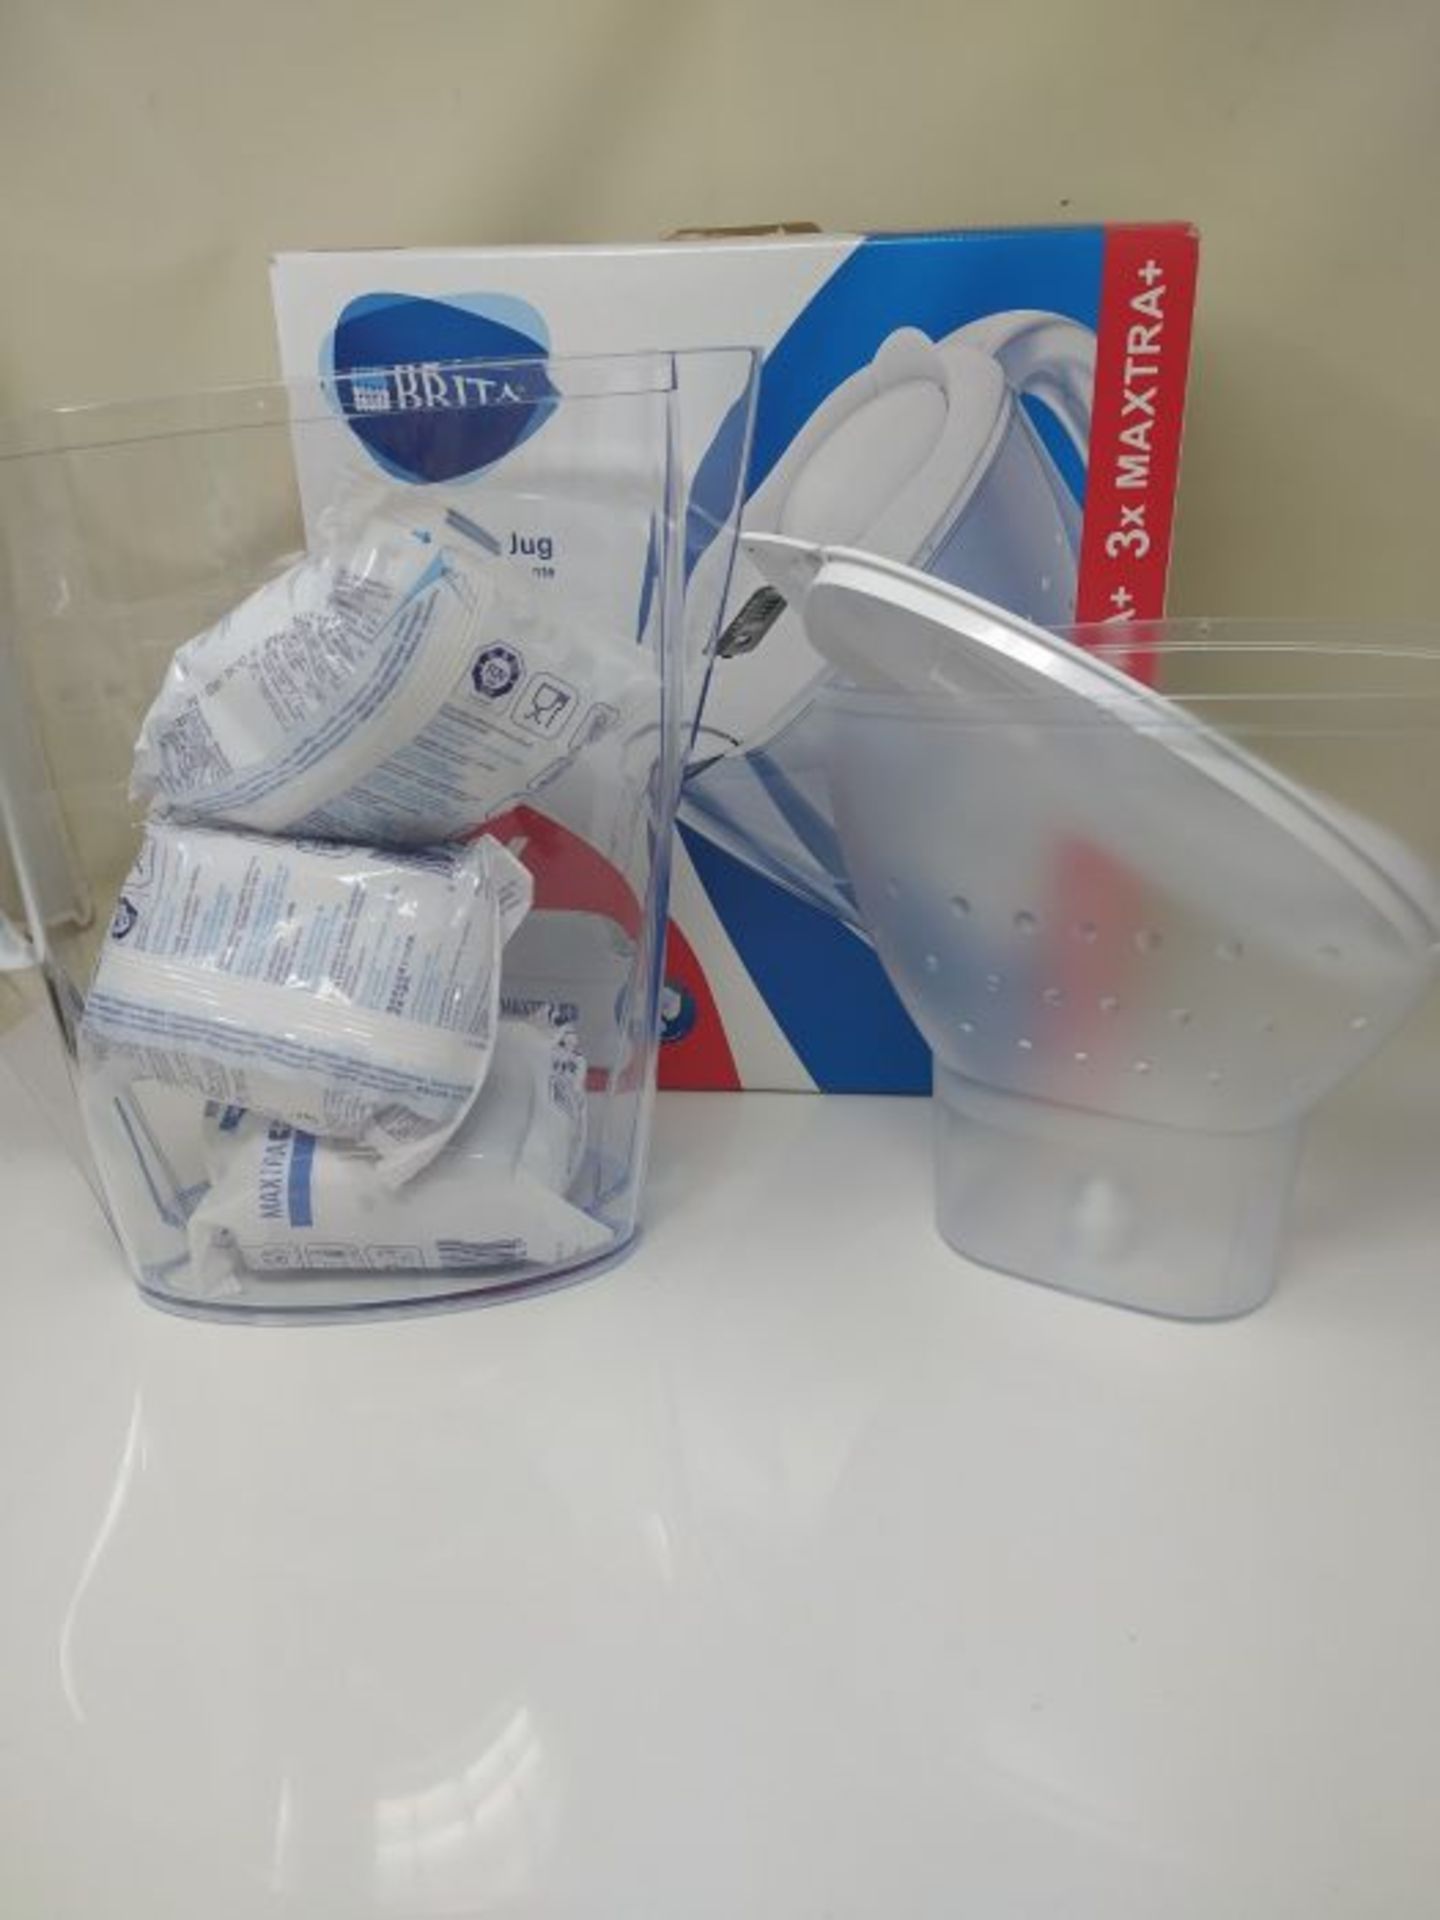 BRITA Marella fridge water filter jug for reduction of chlorine, limescale and impurit - Image 2 of 2